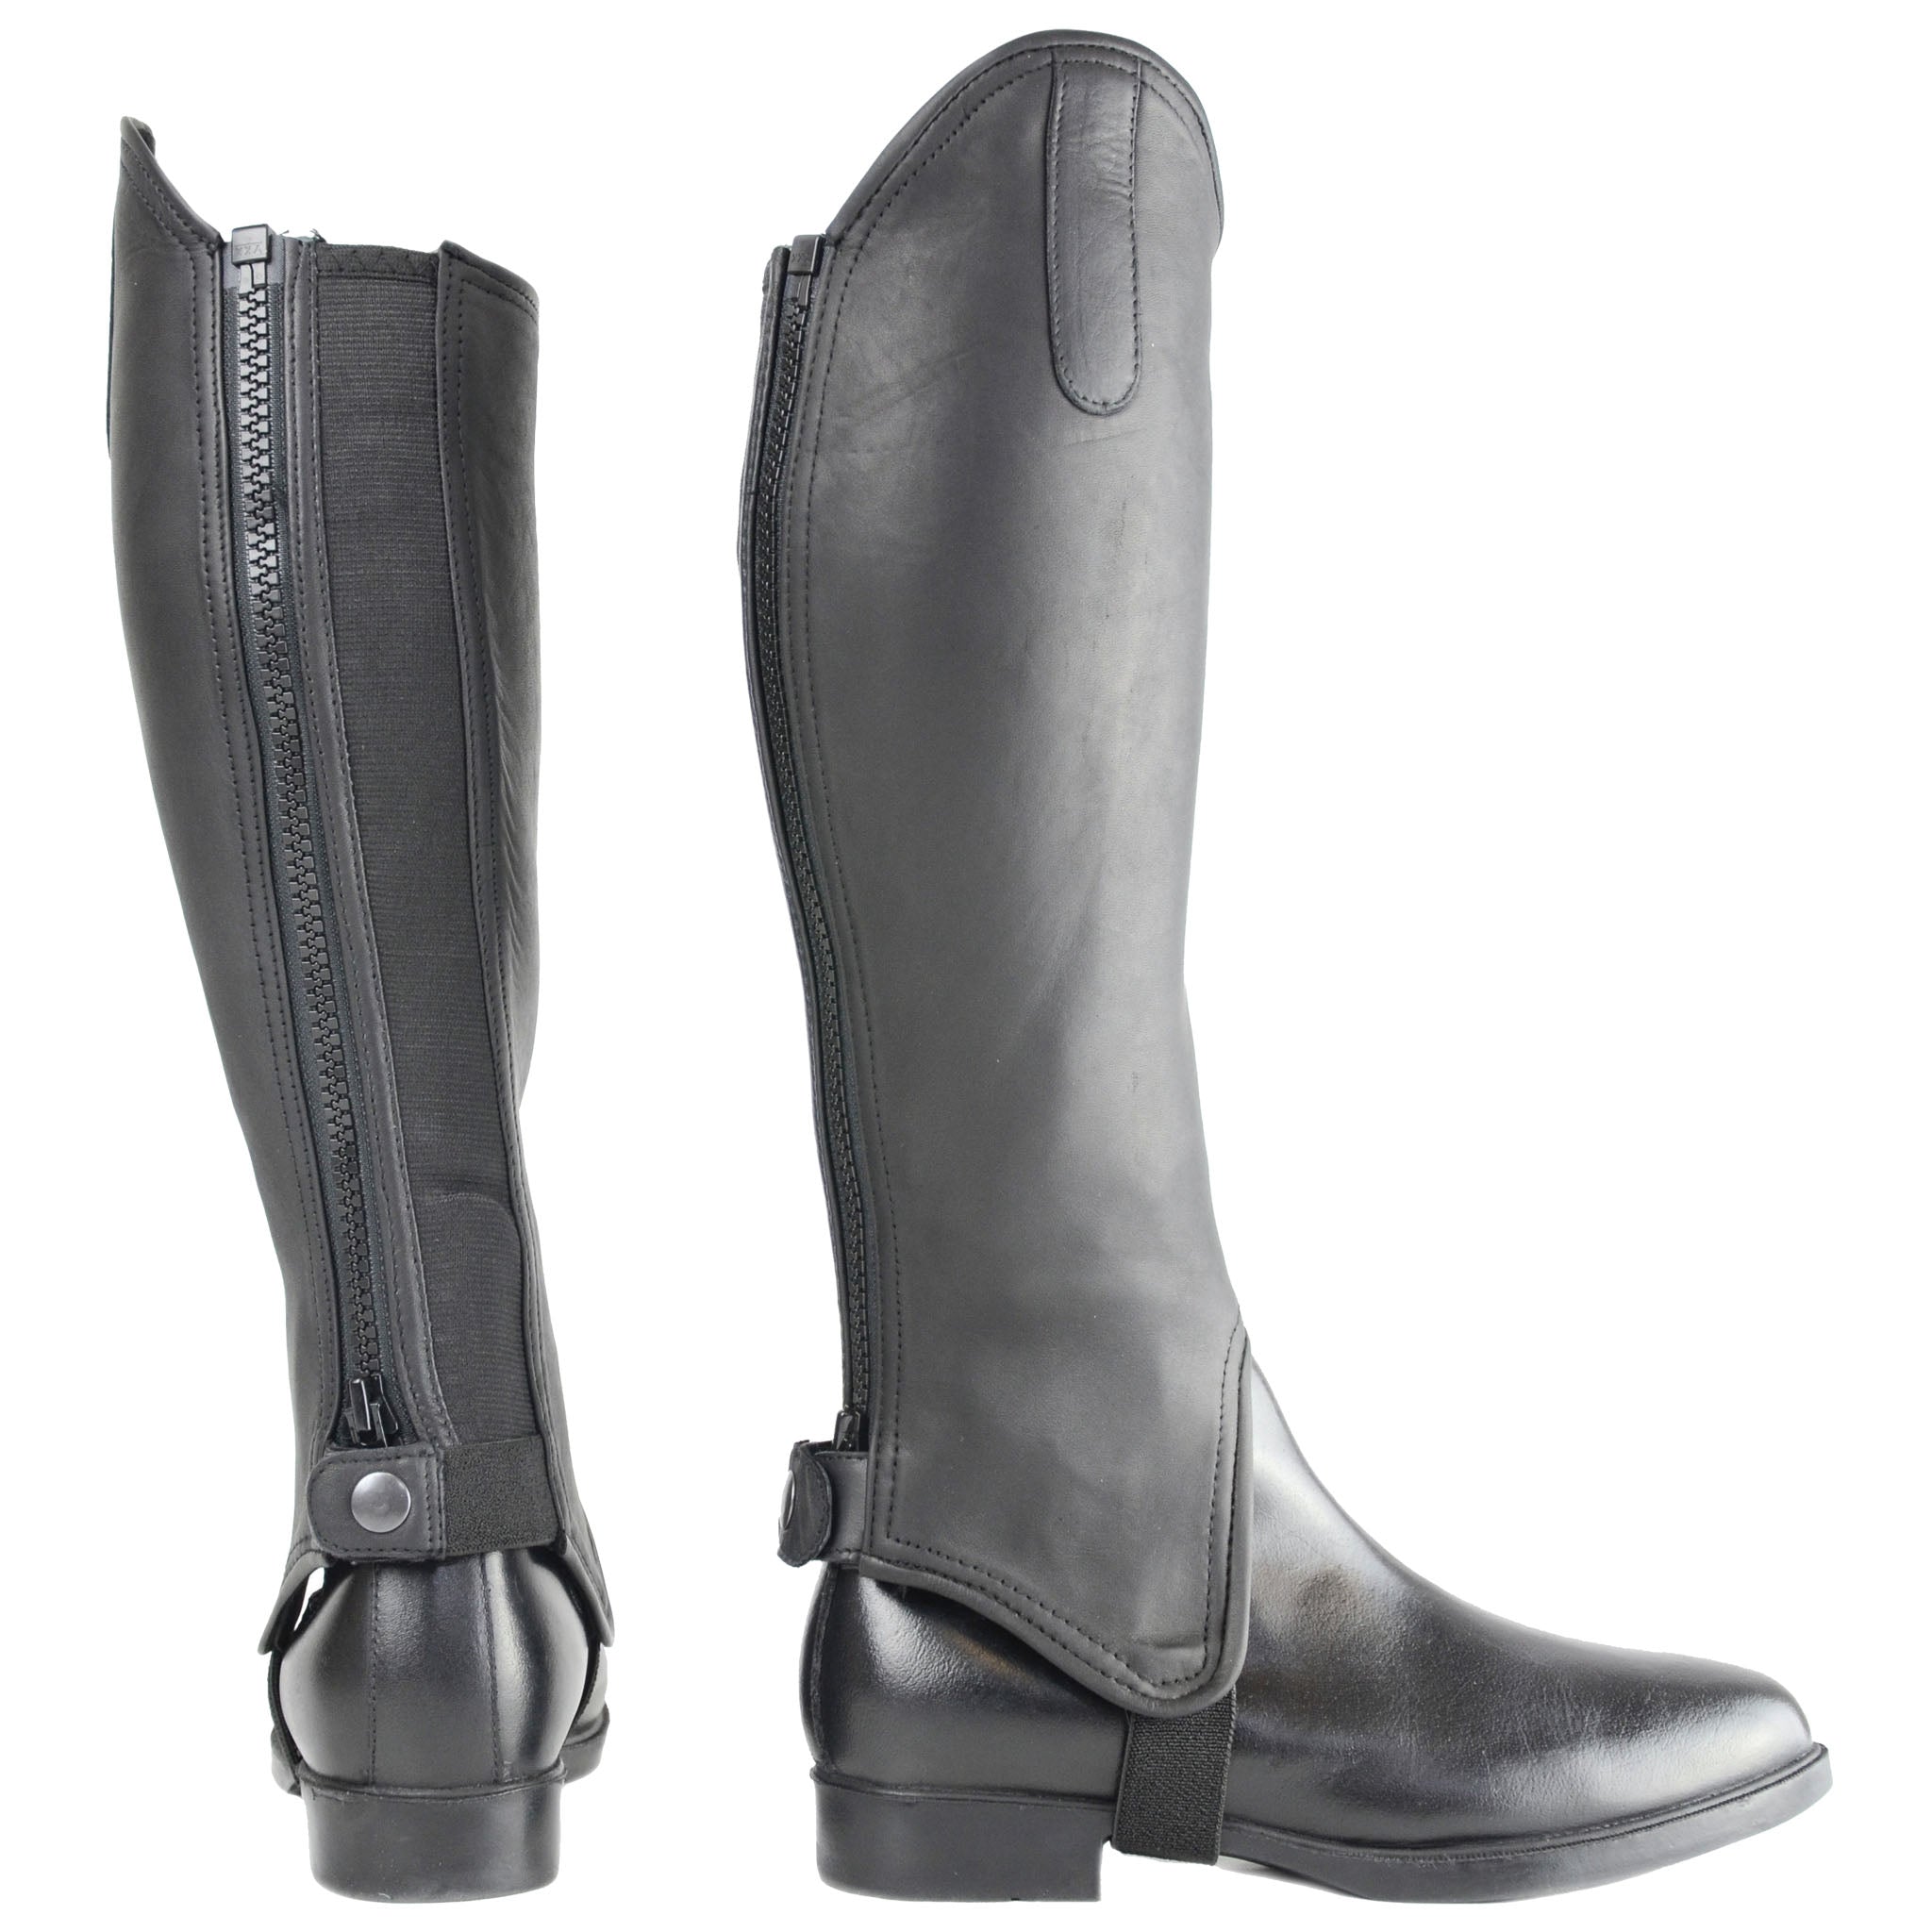 Hy Leather Gaiters - A High Quality Leather Gaiter